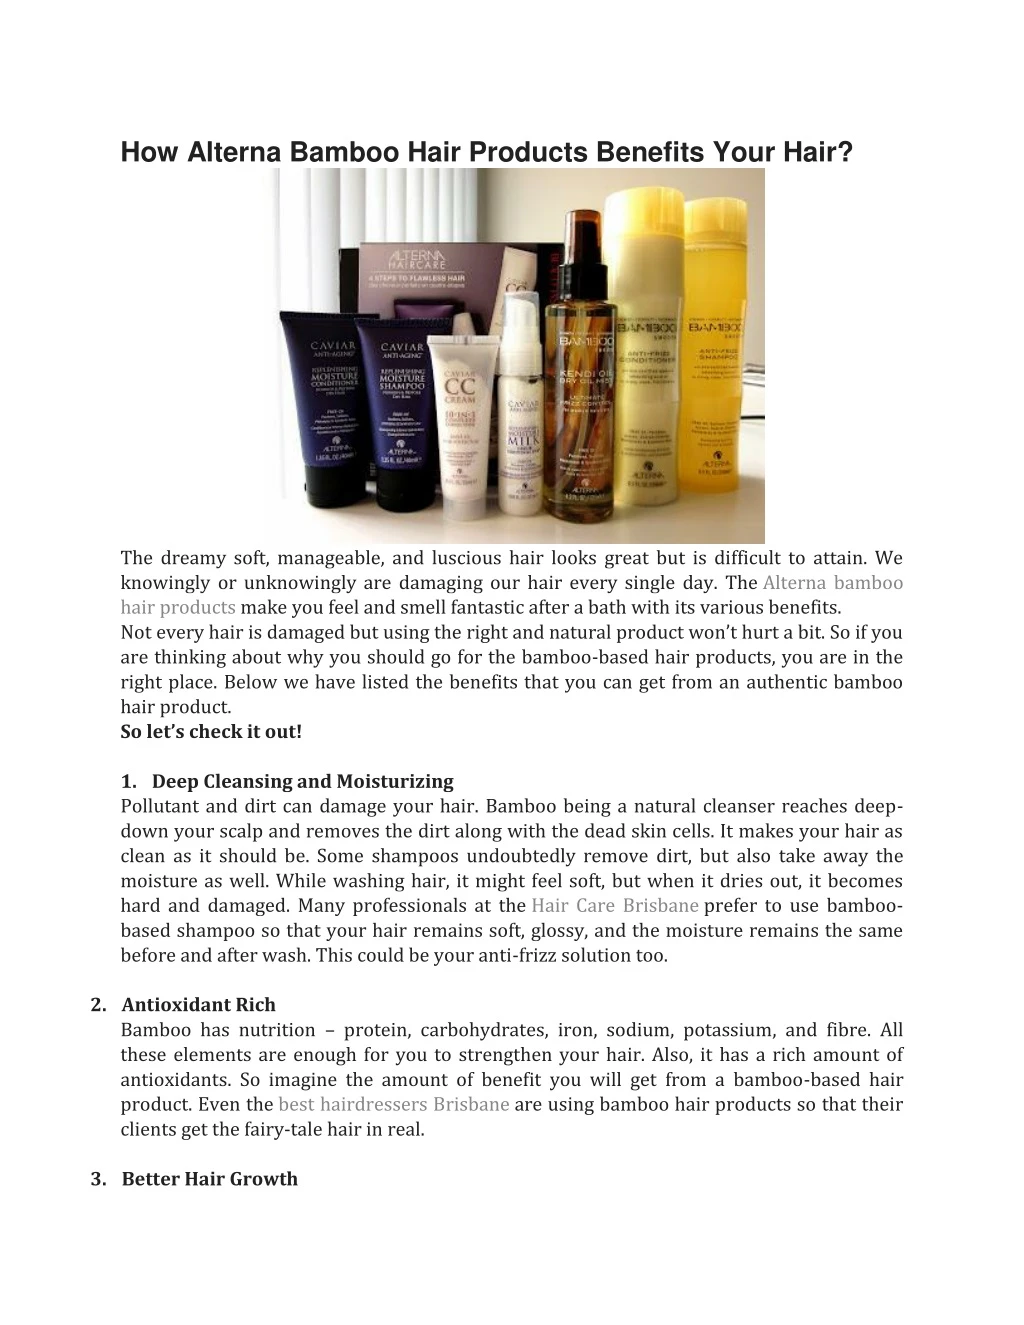 how alterna bamboo hair products benefits your